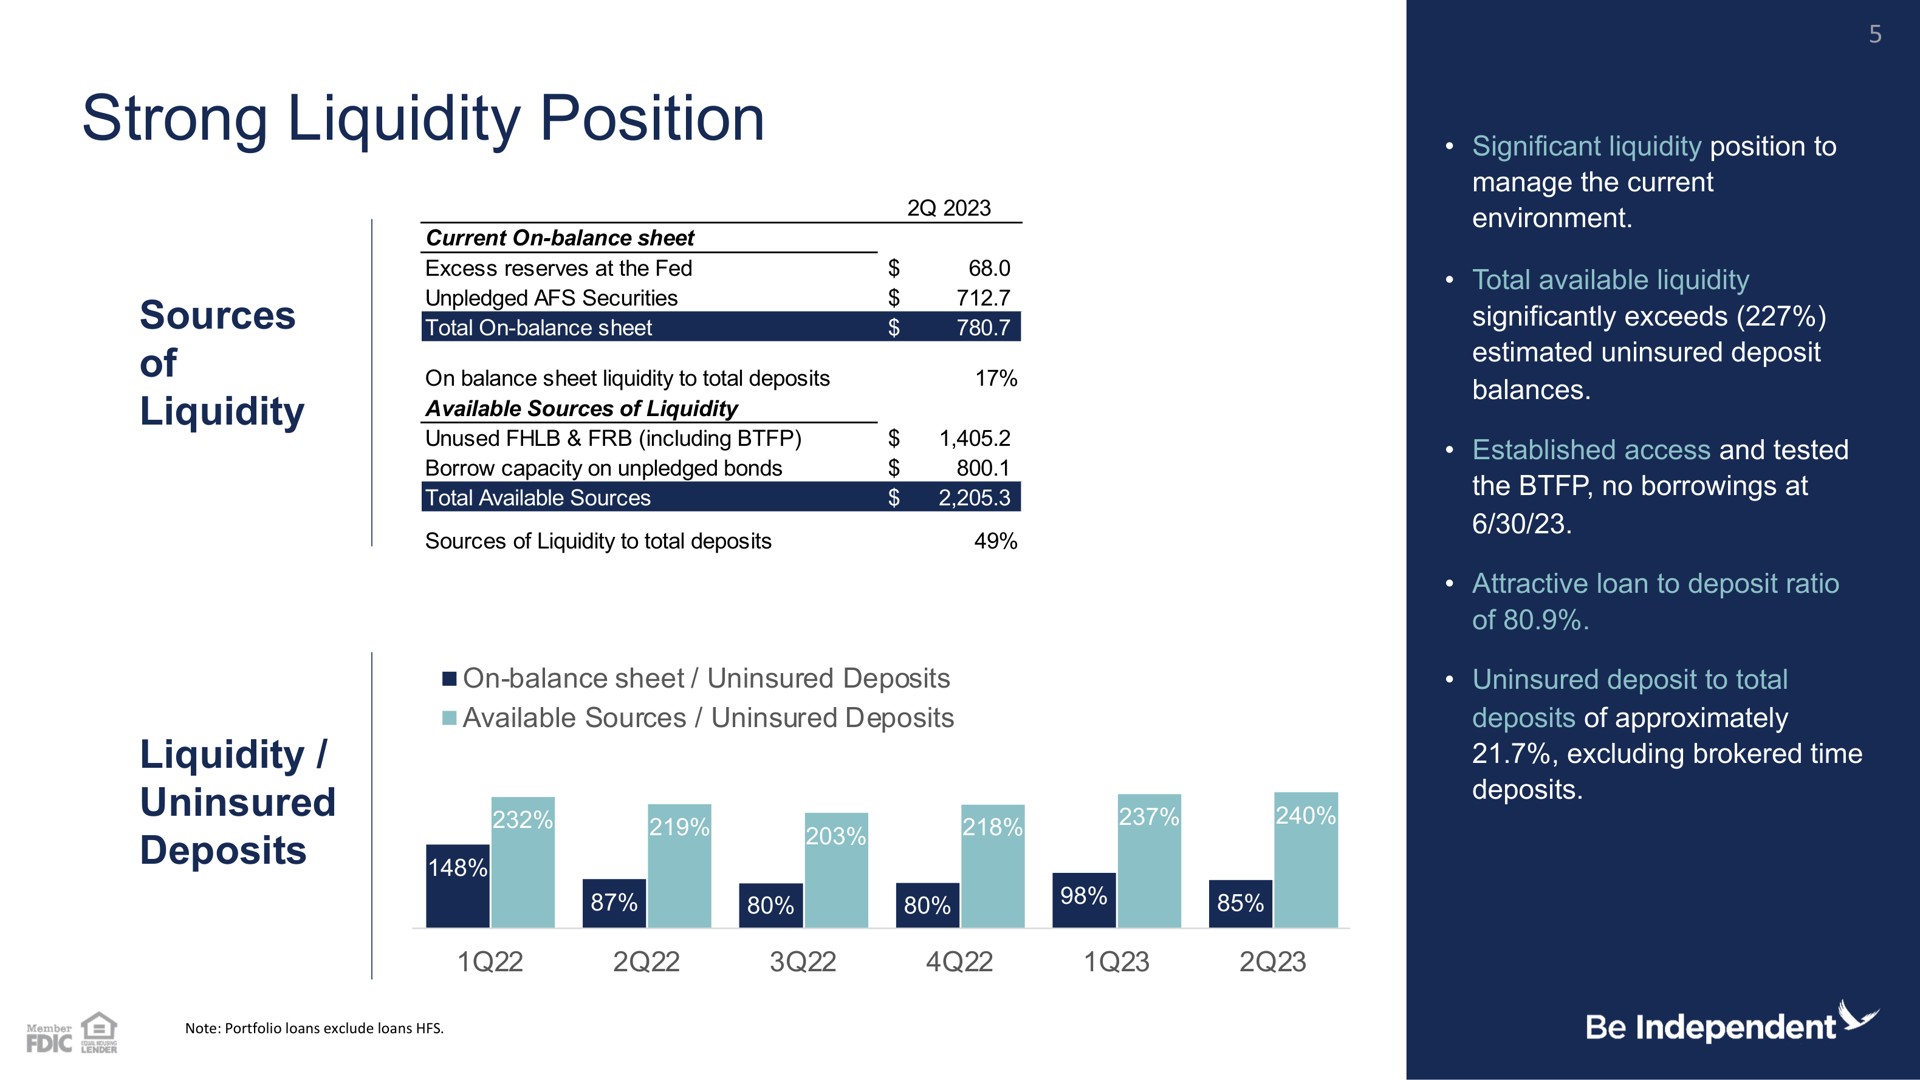 strong liquidity position uninsured deposits | Independent Bank Corp